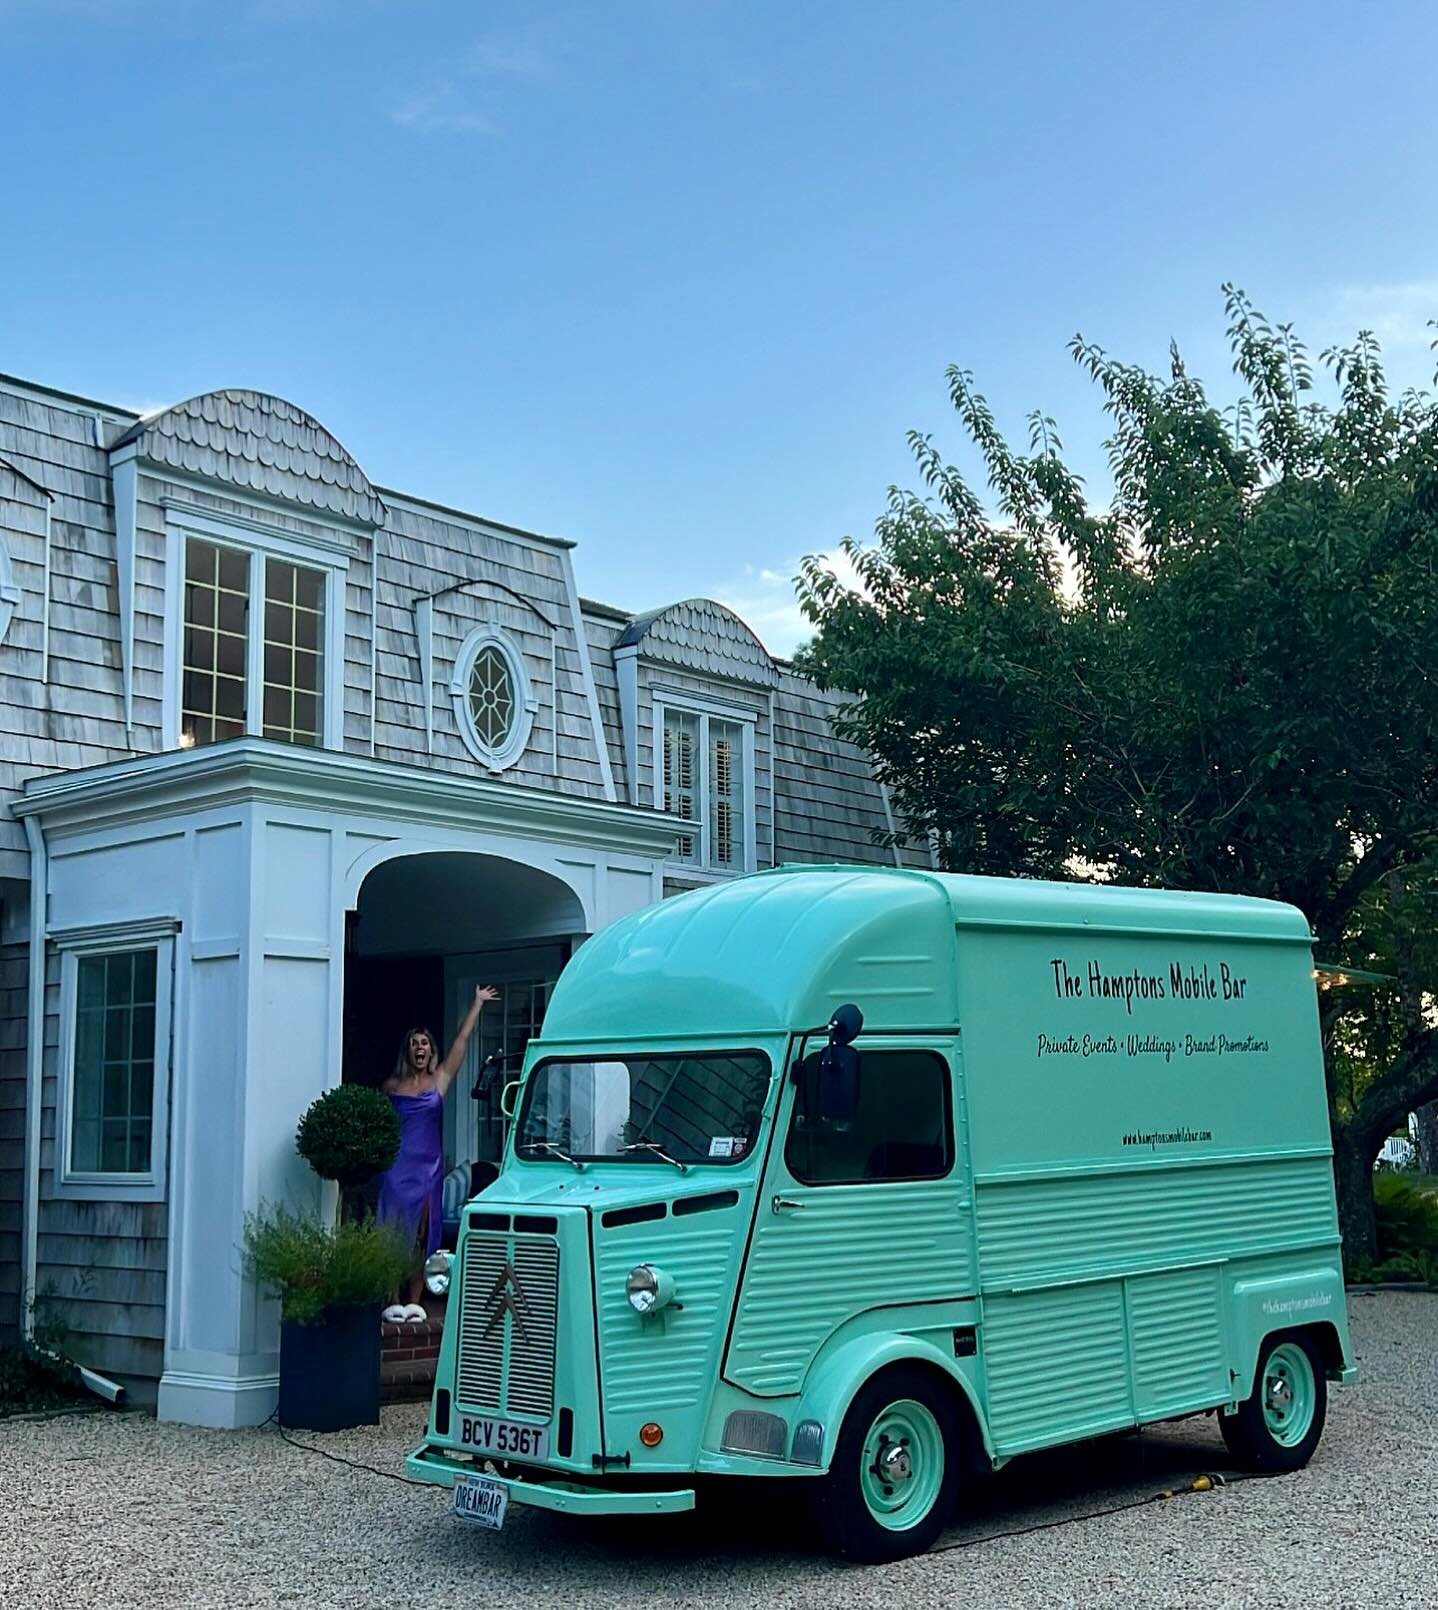 Yes, this is how we expect to be greeted when we arrive because we all know - it&rsquo;s about to be a fuuunn night 🥰 💃🏽🪩🕺🏻
.
.
.
.
.
.
.
#drinksanddreams#hamptonsmobilebar#mobilebar#hamptonsstyle#bartruck#barvan#thehamptons#craftcocktails#hamp